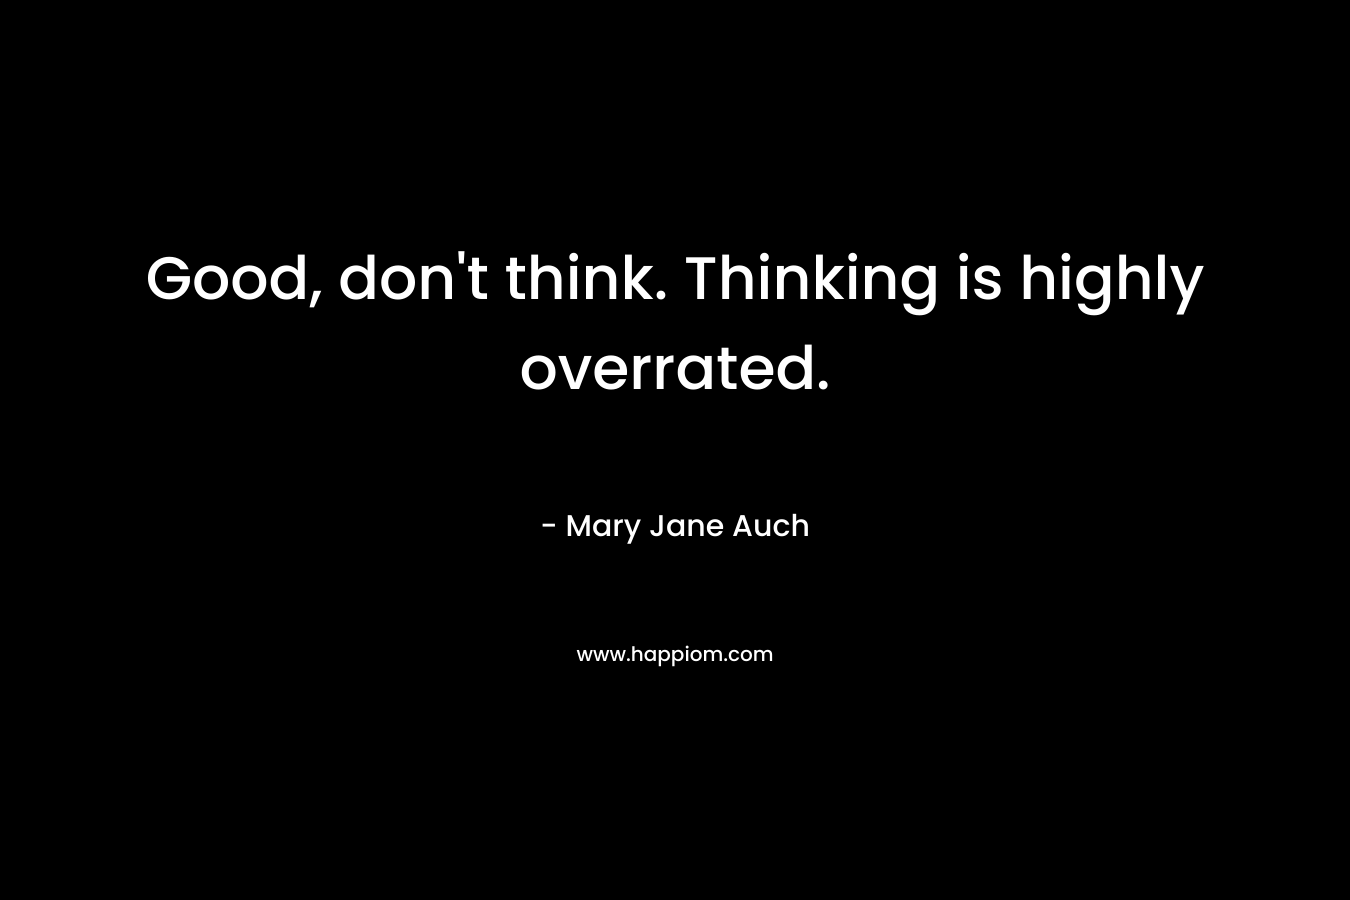 Good, don’t think. Thinking is highly overrated. – Mary Jane Auch